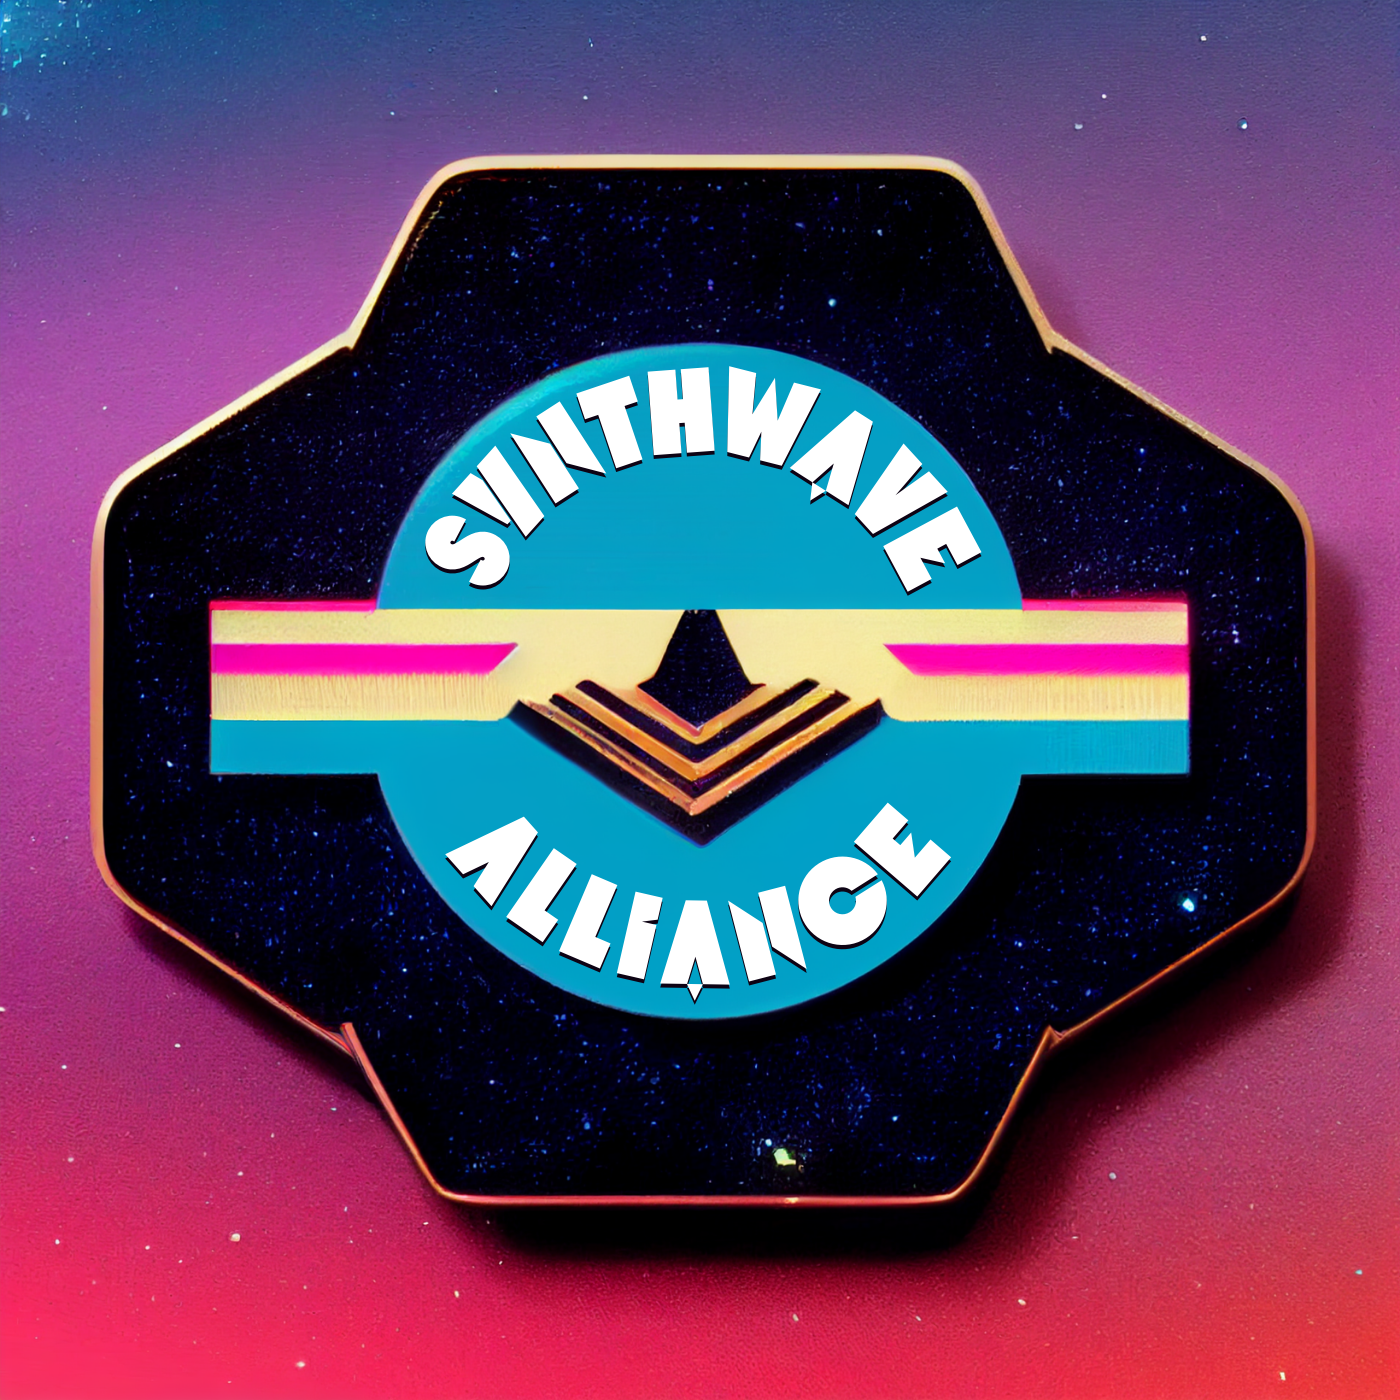 Synthwave Alliance